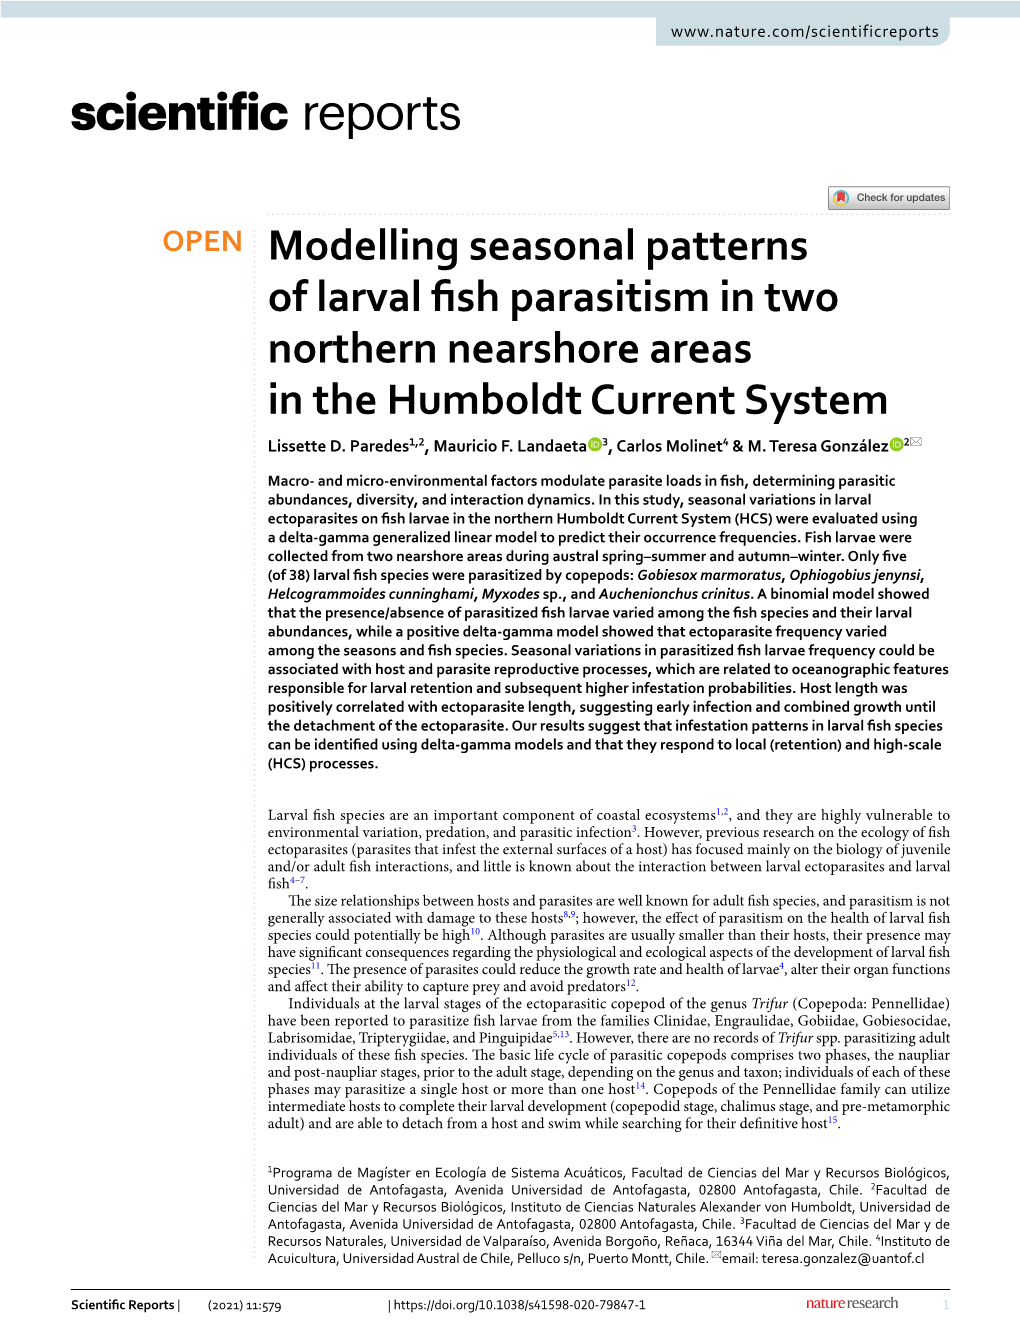 Modelling Seasonal Patterns of Larval Fish Parasitism in Two Northern